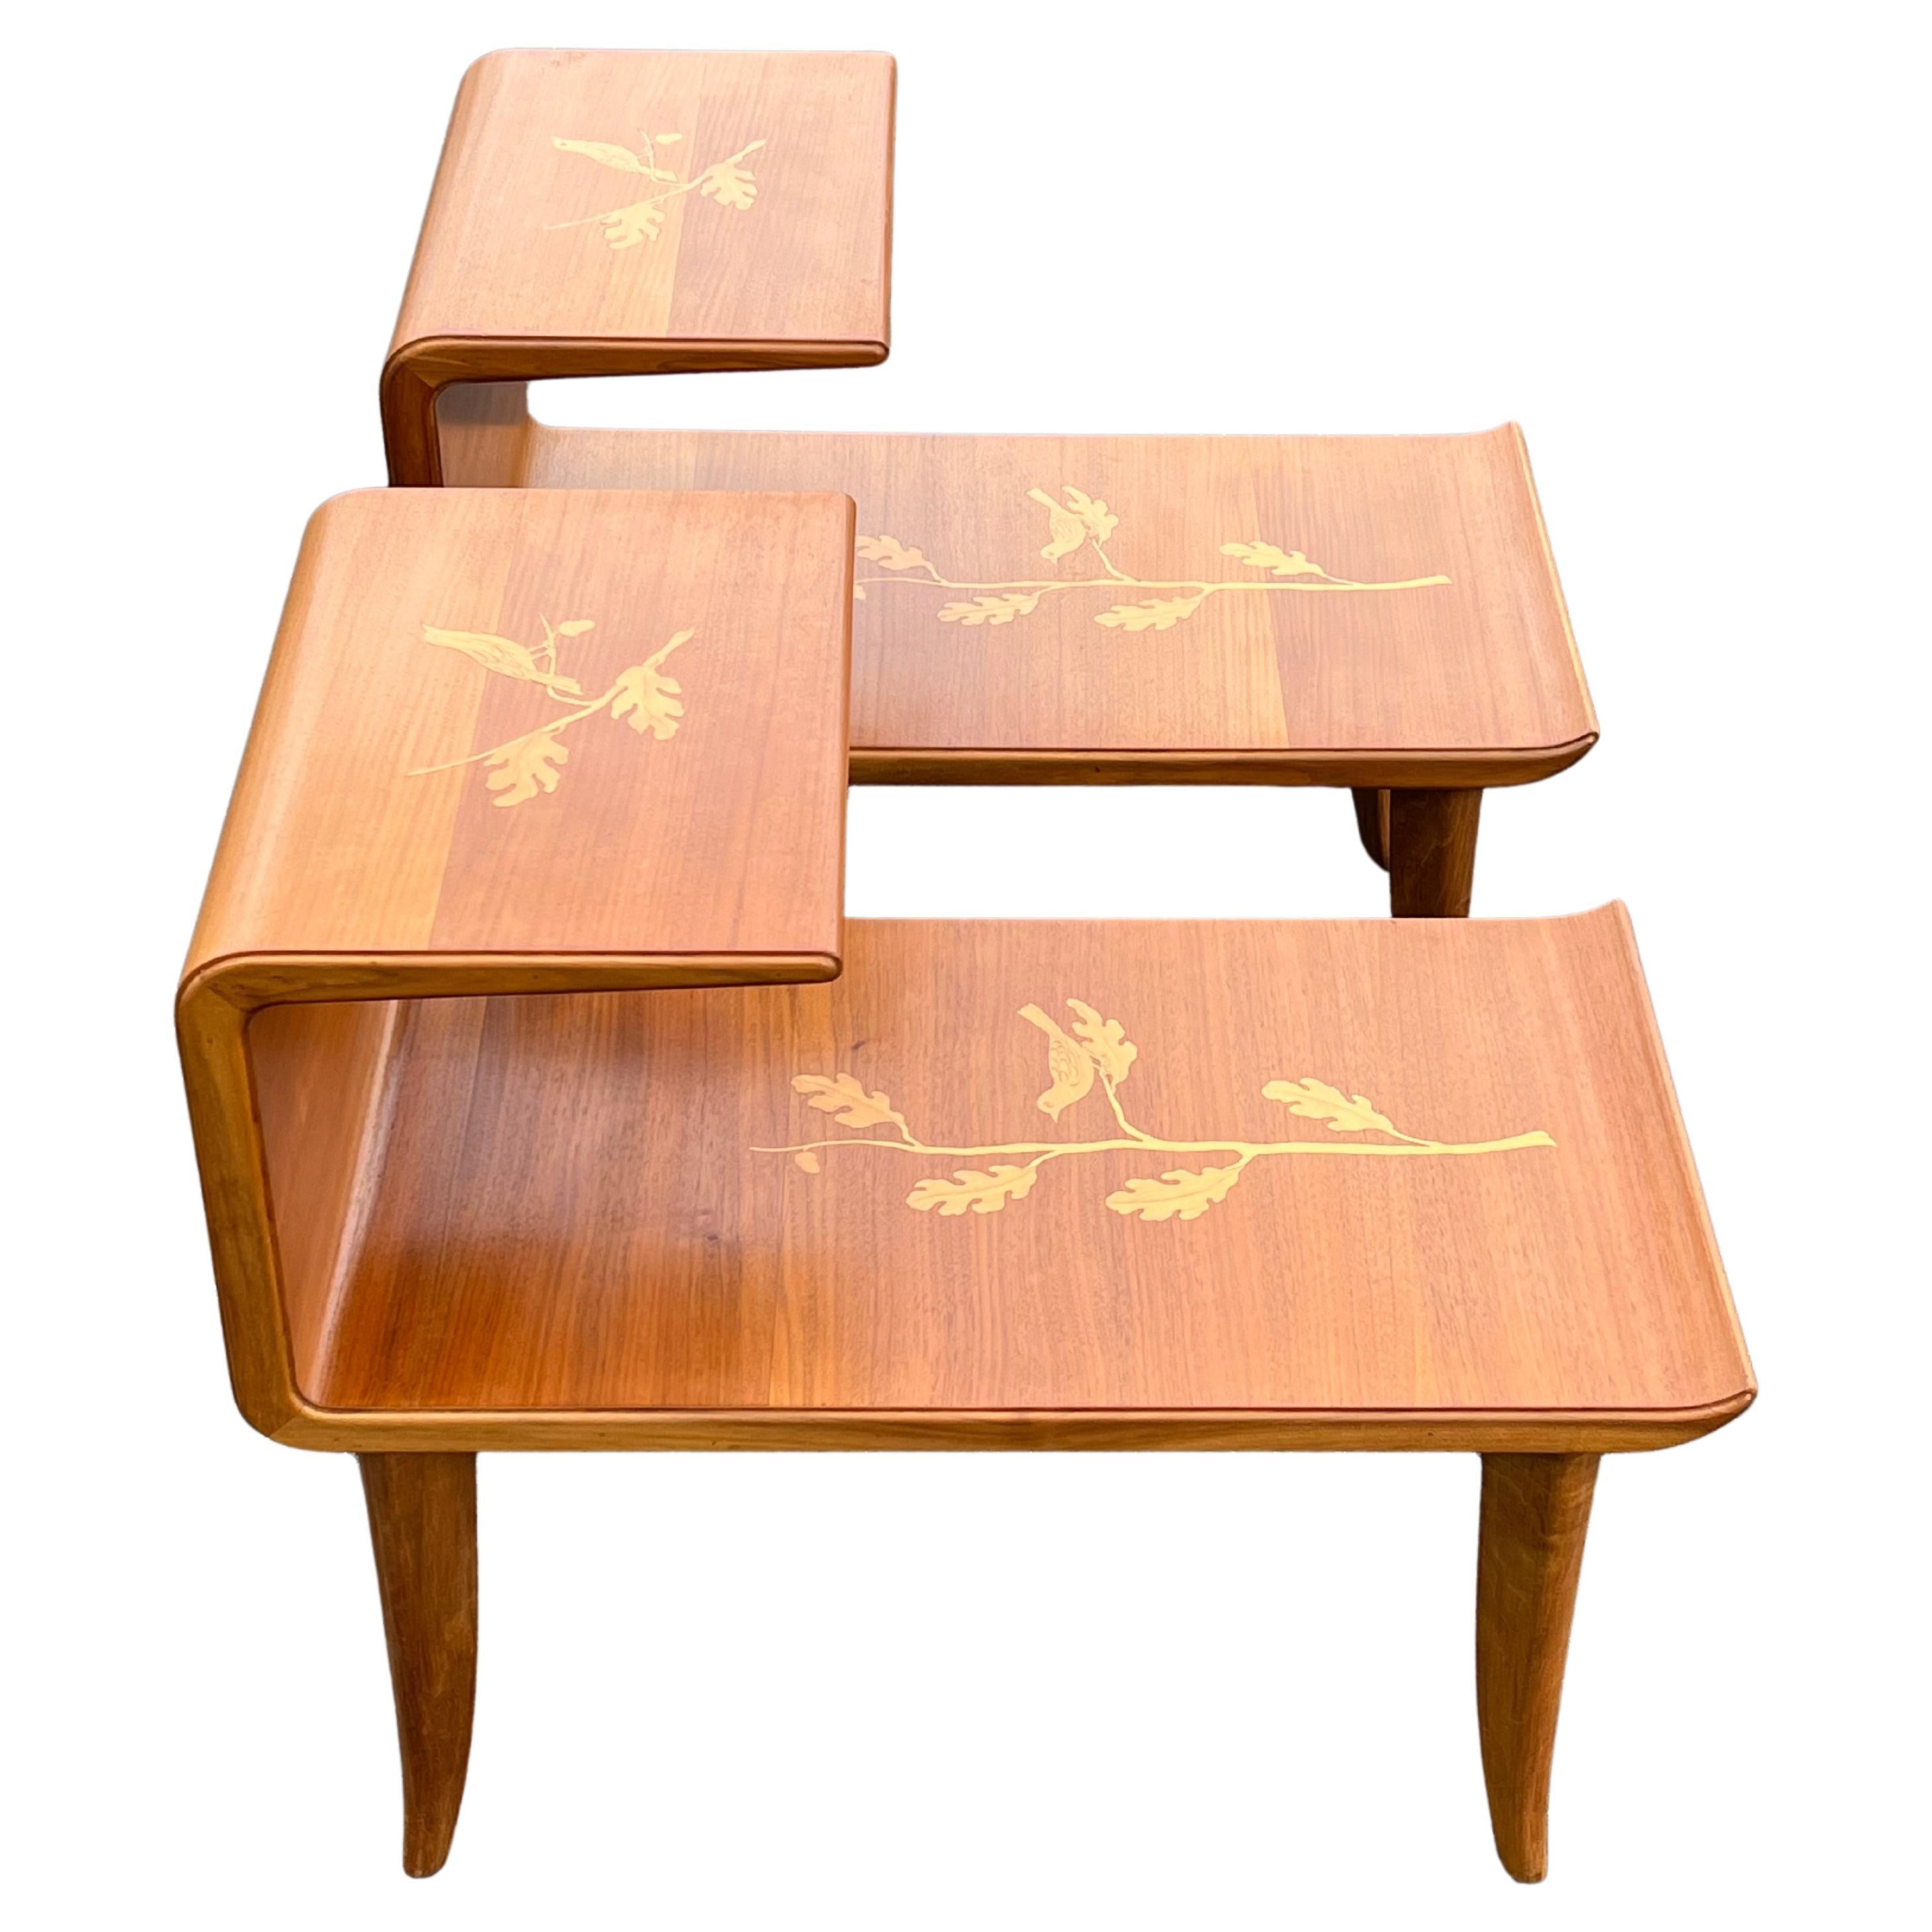 A Pair Of Unusual Italian Side Tables With Inlay Ca' 1940's For Sale